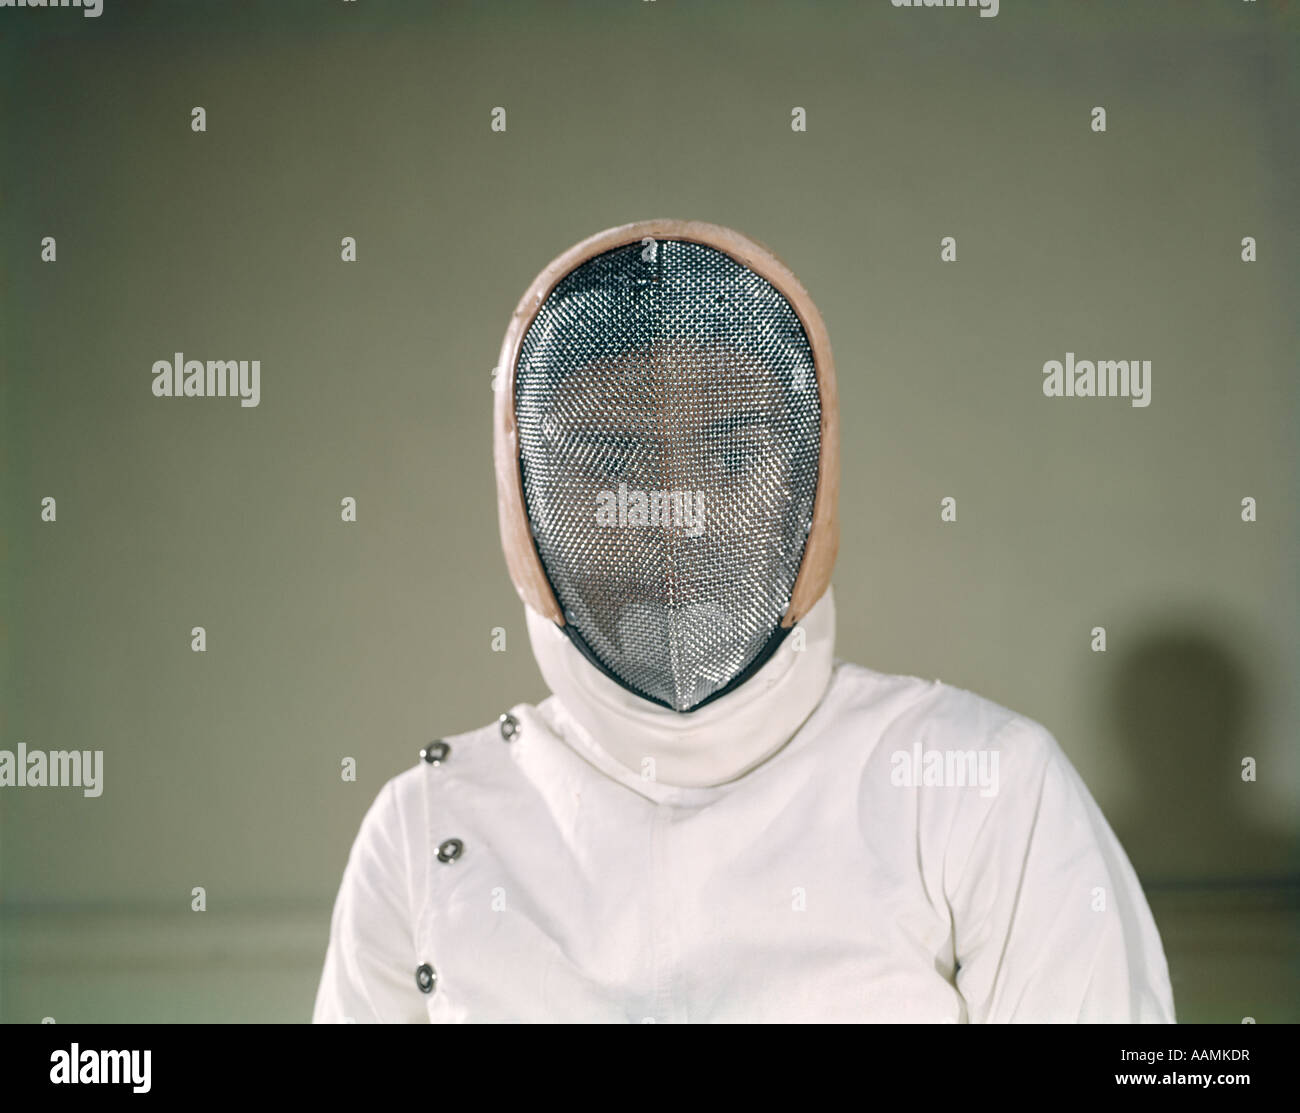 1960s FENCER WEARING PROTECTIVE SCREEN MASK SAFETY IDENTITY BLANK MYSTERY MAN Stock Photo